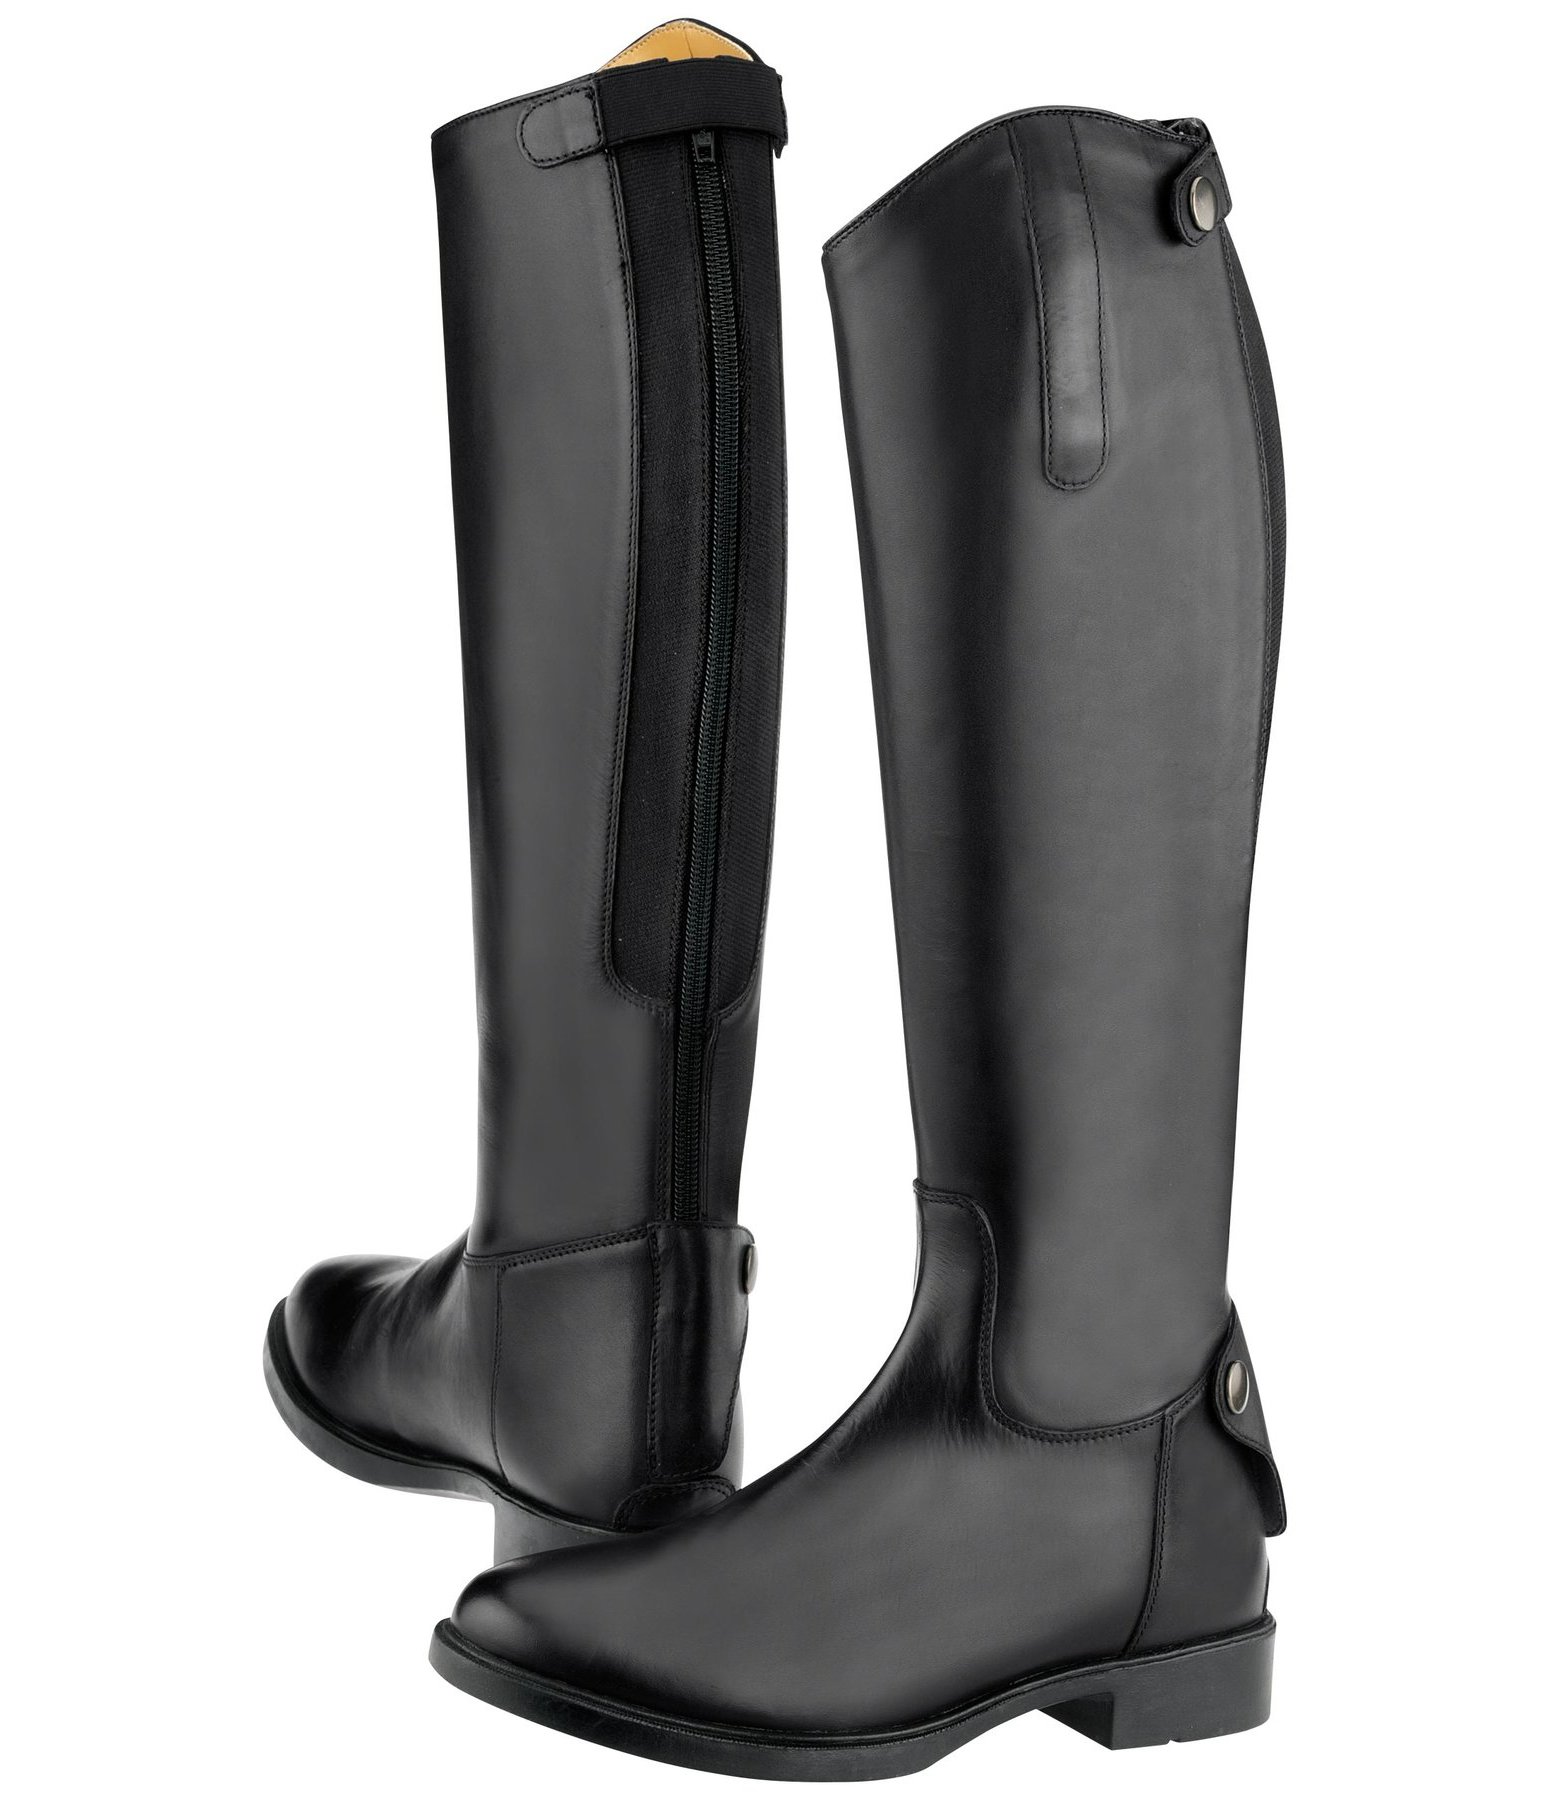 steeds winter riding boots